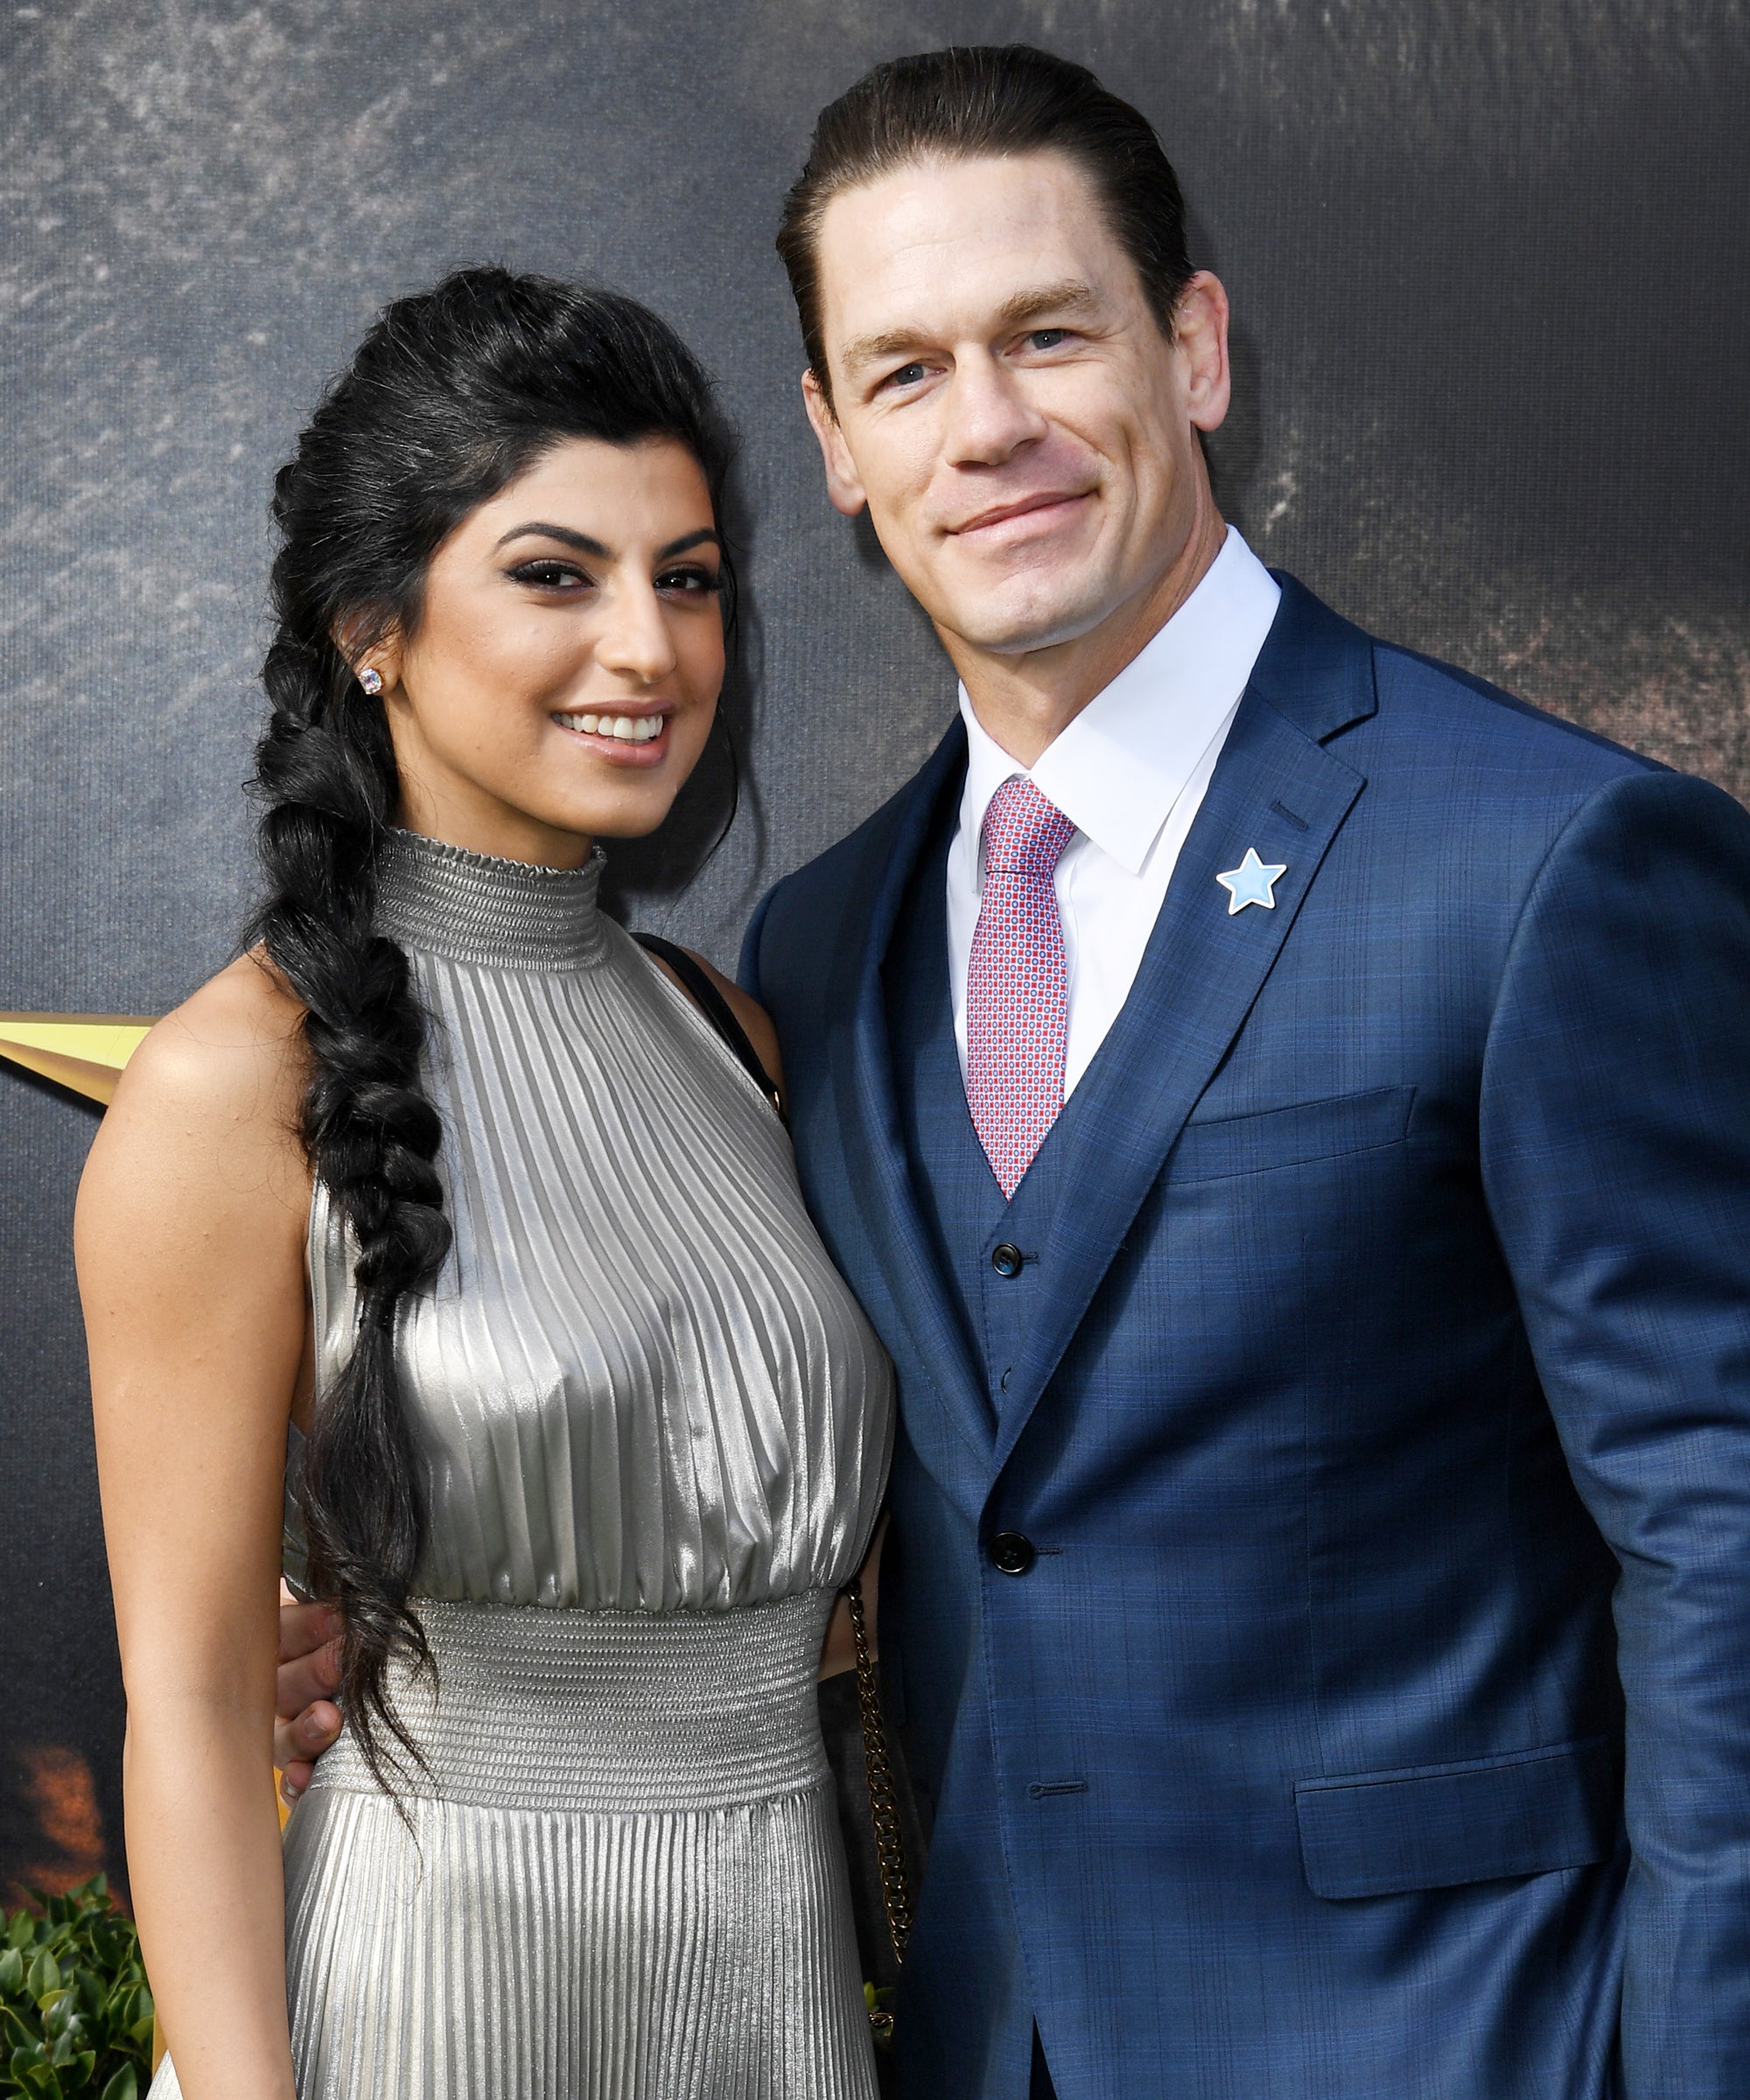 John Cena & Shay Shariatzadeh married in a private party